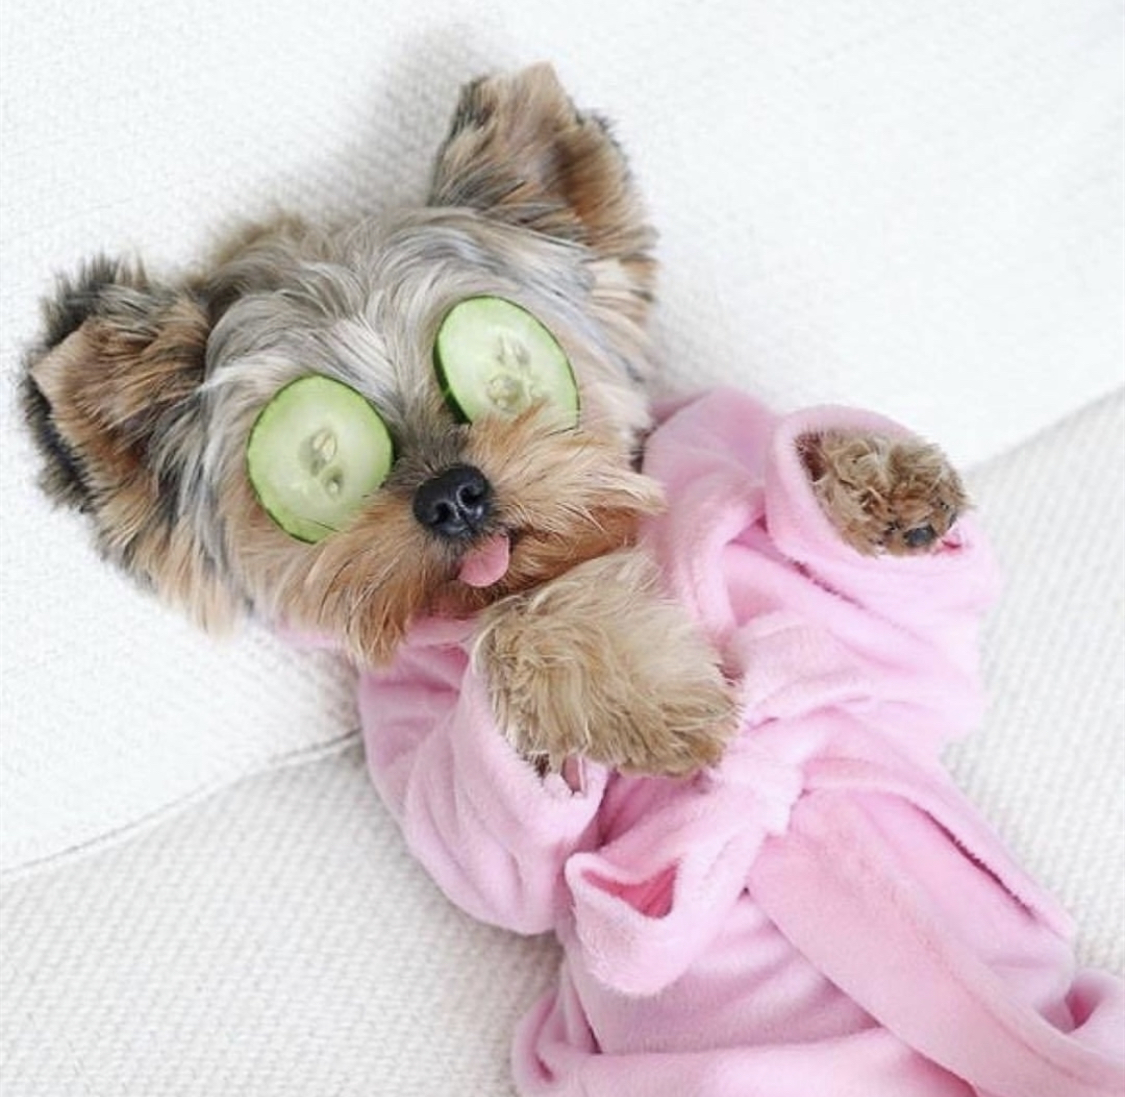 Yorkshire Terrier lying on the bed while wearing bath rub and a sliced cucumber on its eyes